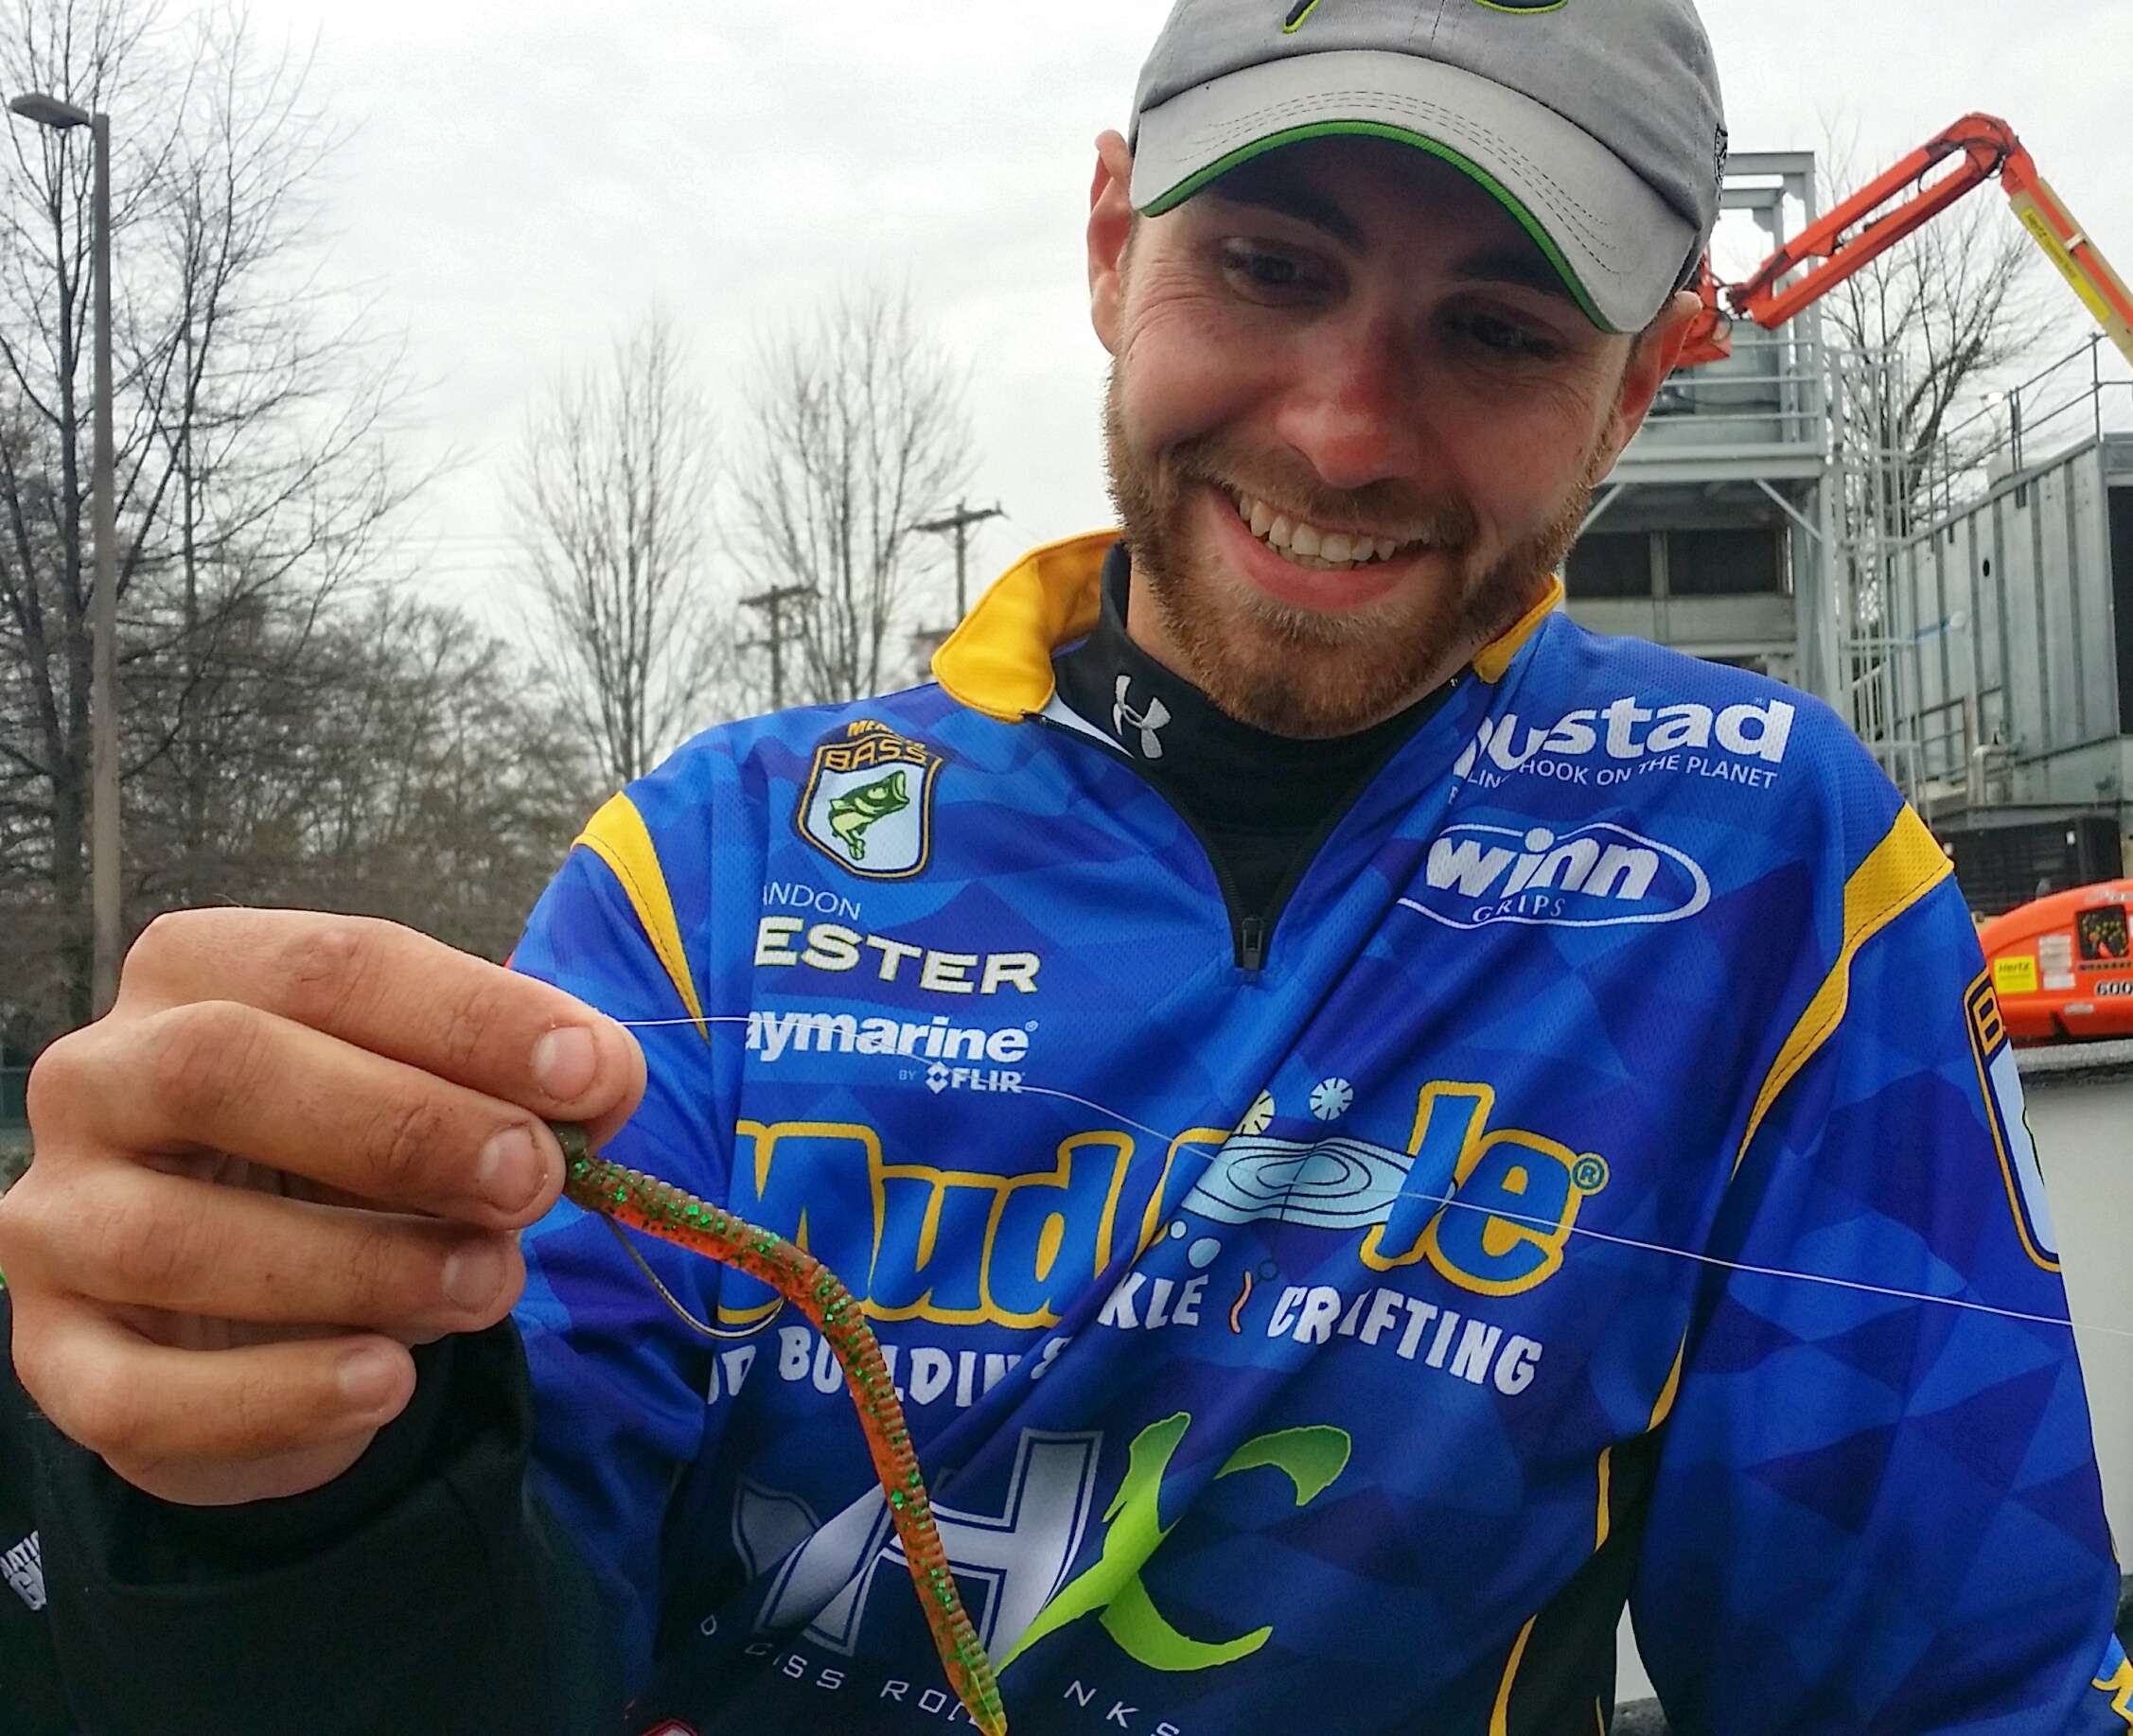 Brandon Lester fished channel bends with rocks and laydowns way upriver. His main bait was a 3/16-oz shaky head with a Zoom Finesse Worm (gourd green).